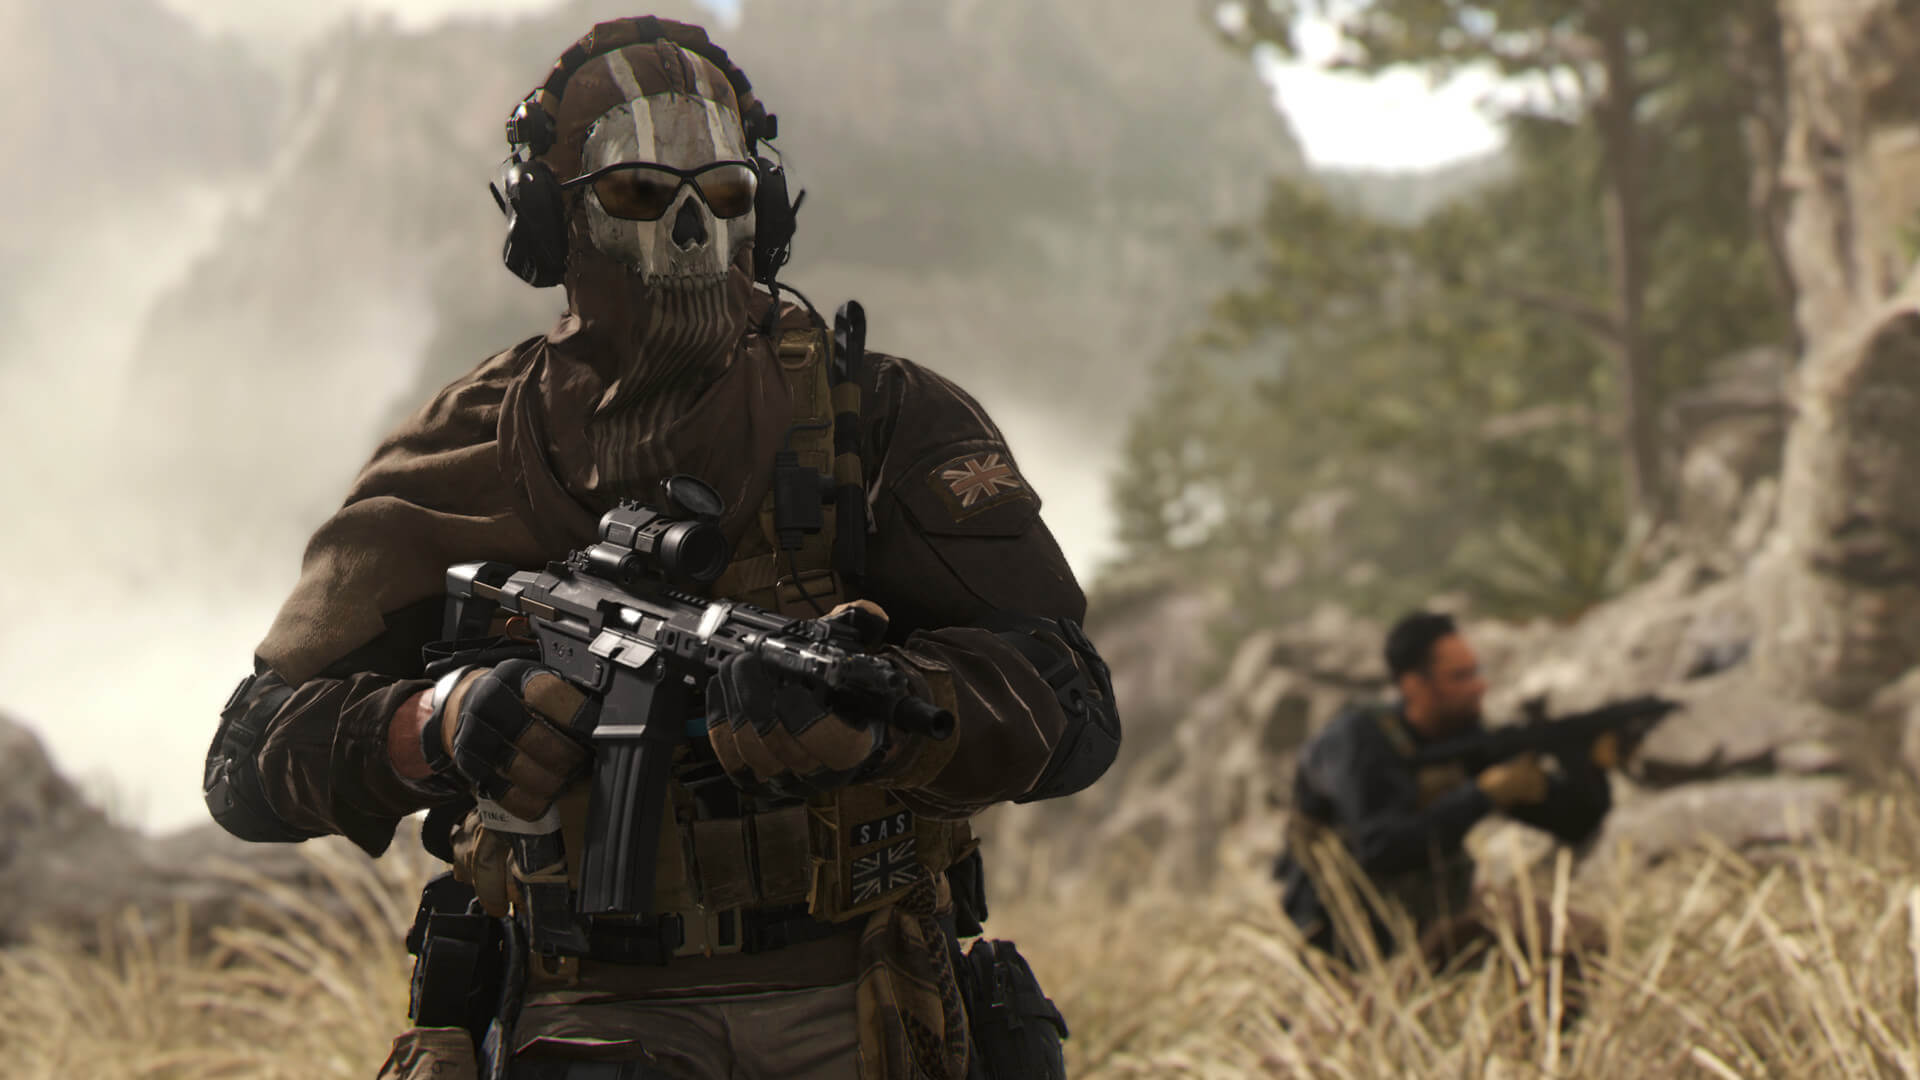 A soldier wearing sunglasses and a mask looking menacing in Call of Duty: Modern Warfare 2